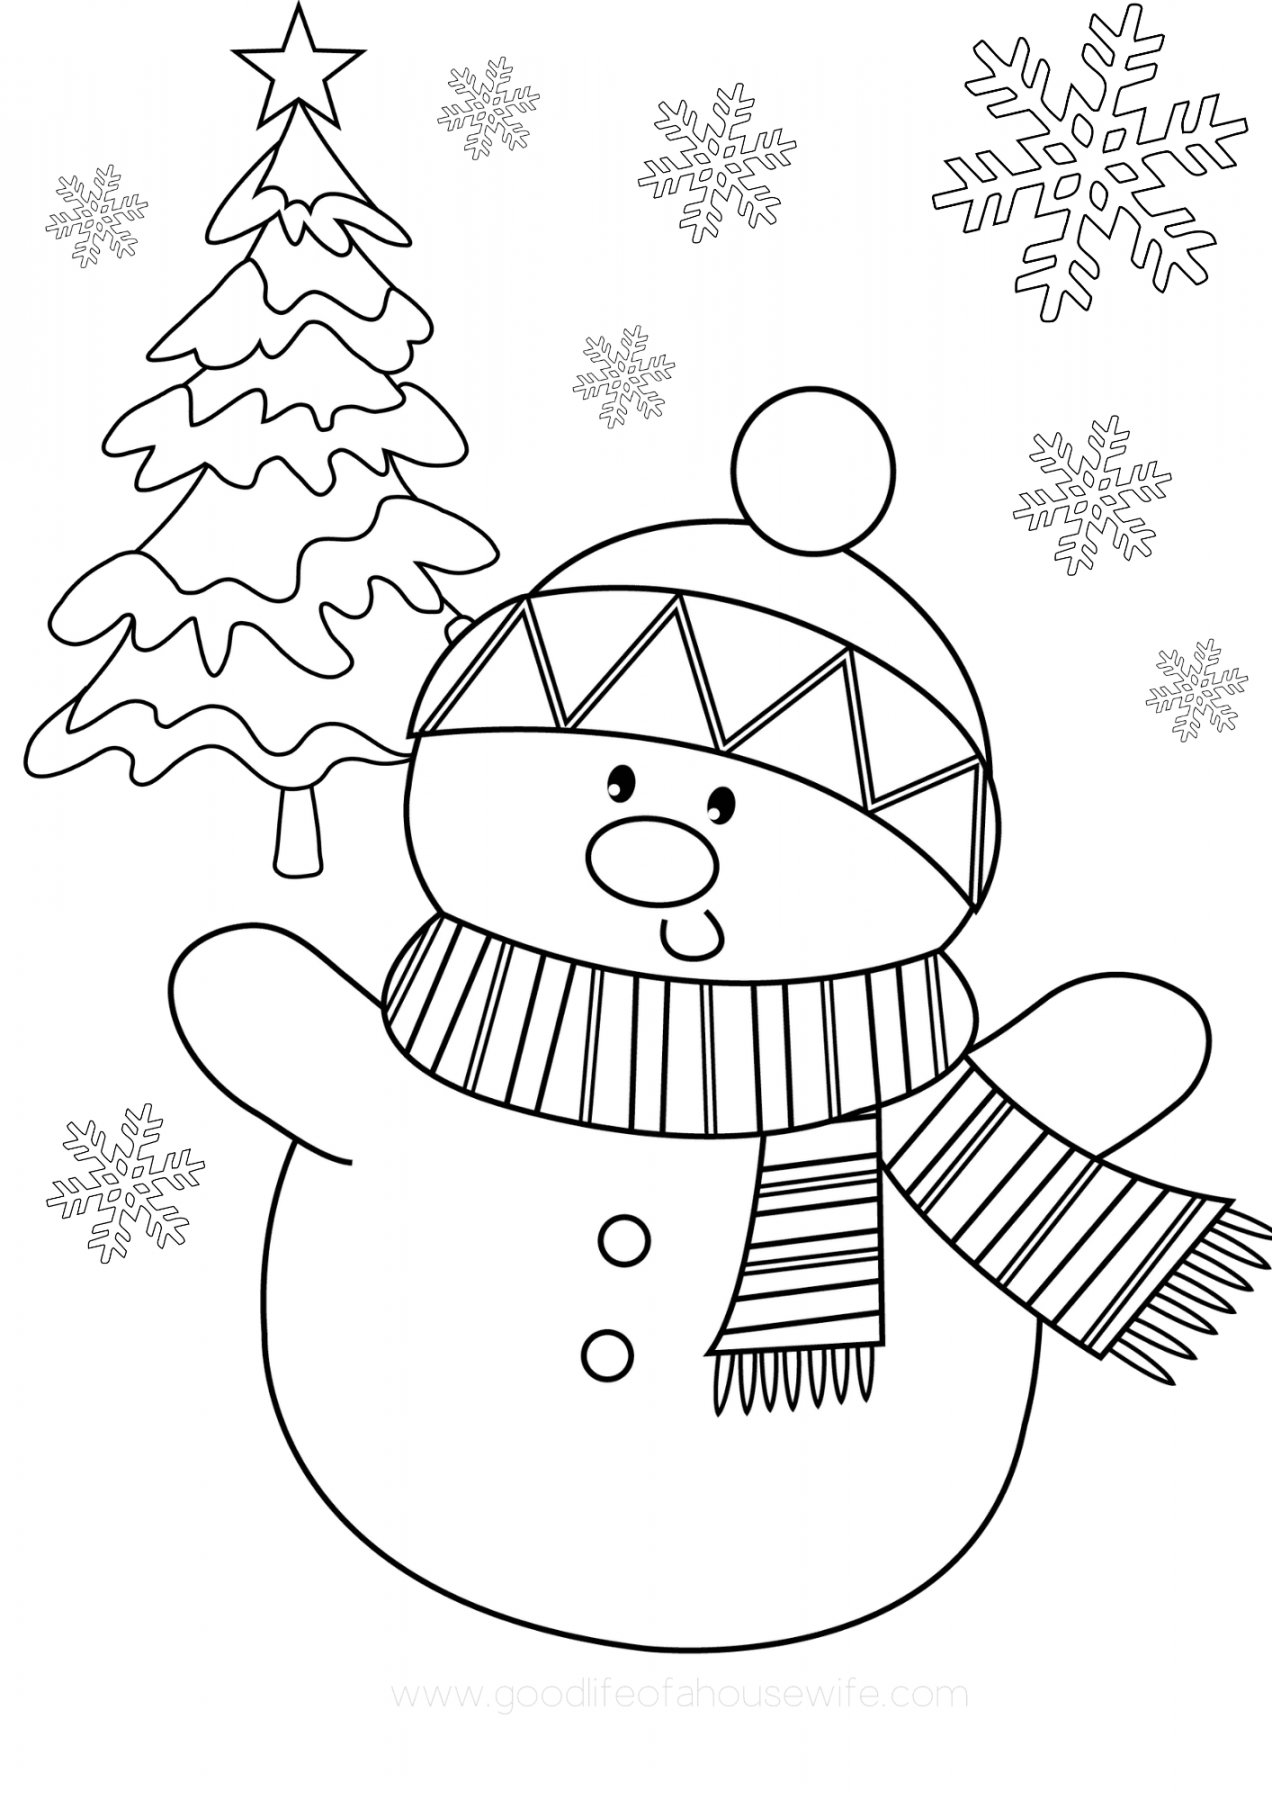 Printable Christmas Coloring Pages Free - Printable - Free Printable Christmas Coloring Pages - Good Life of a Housewife